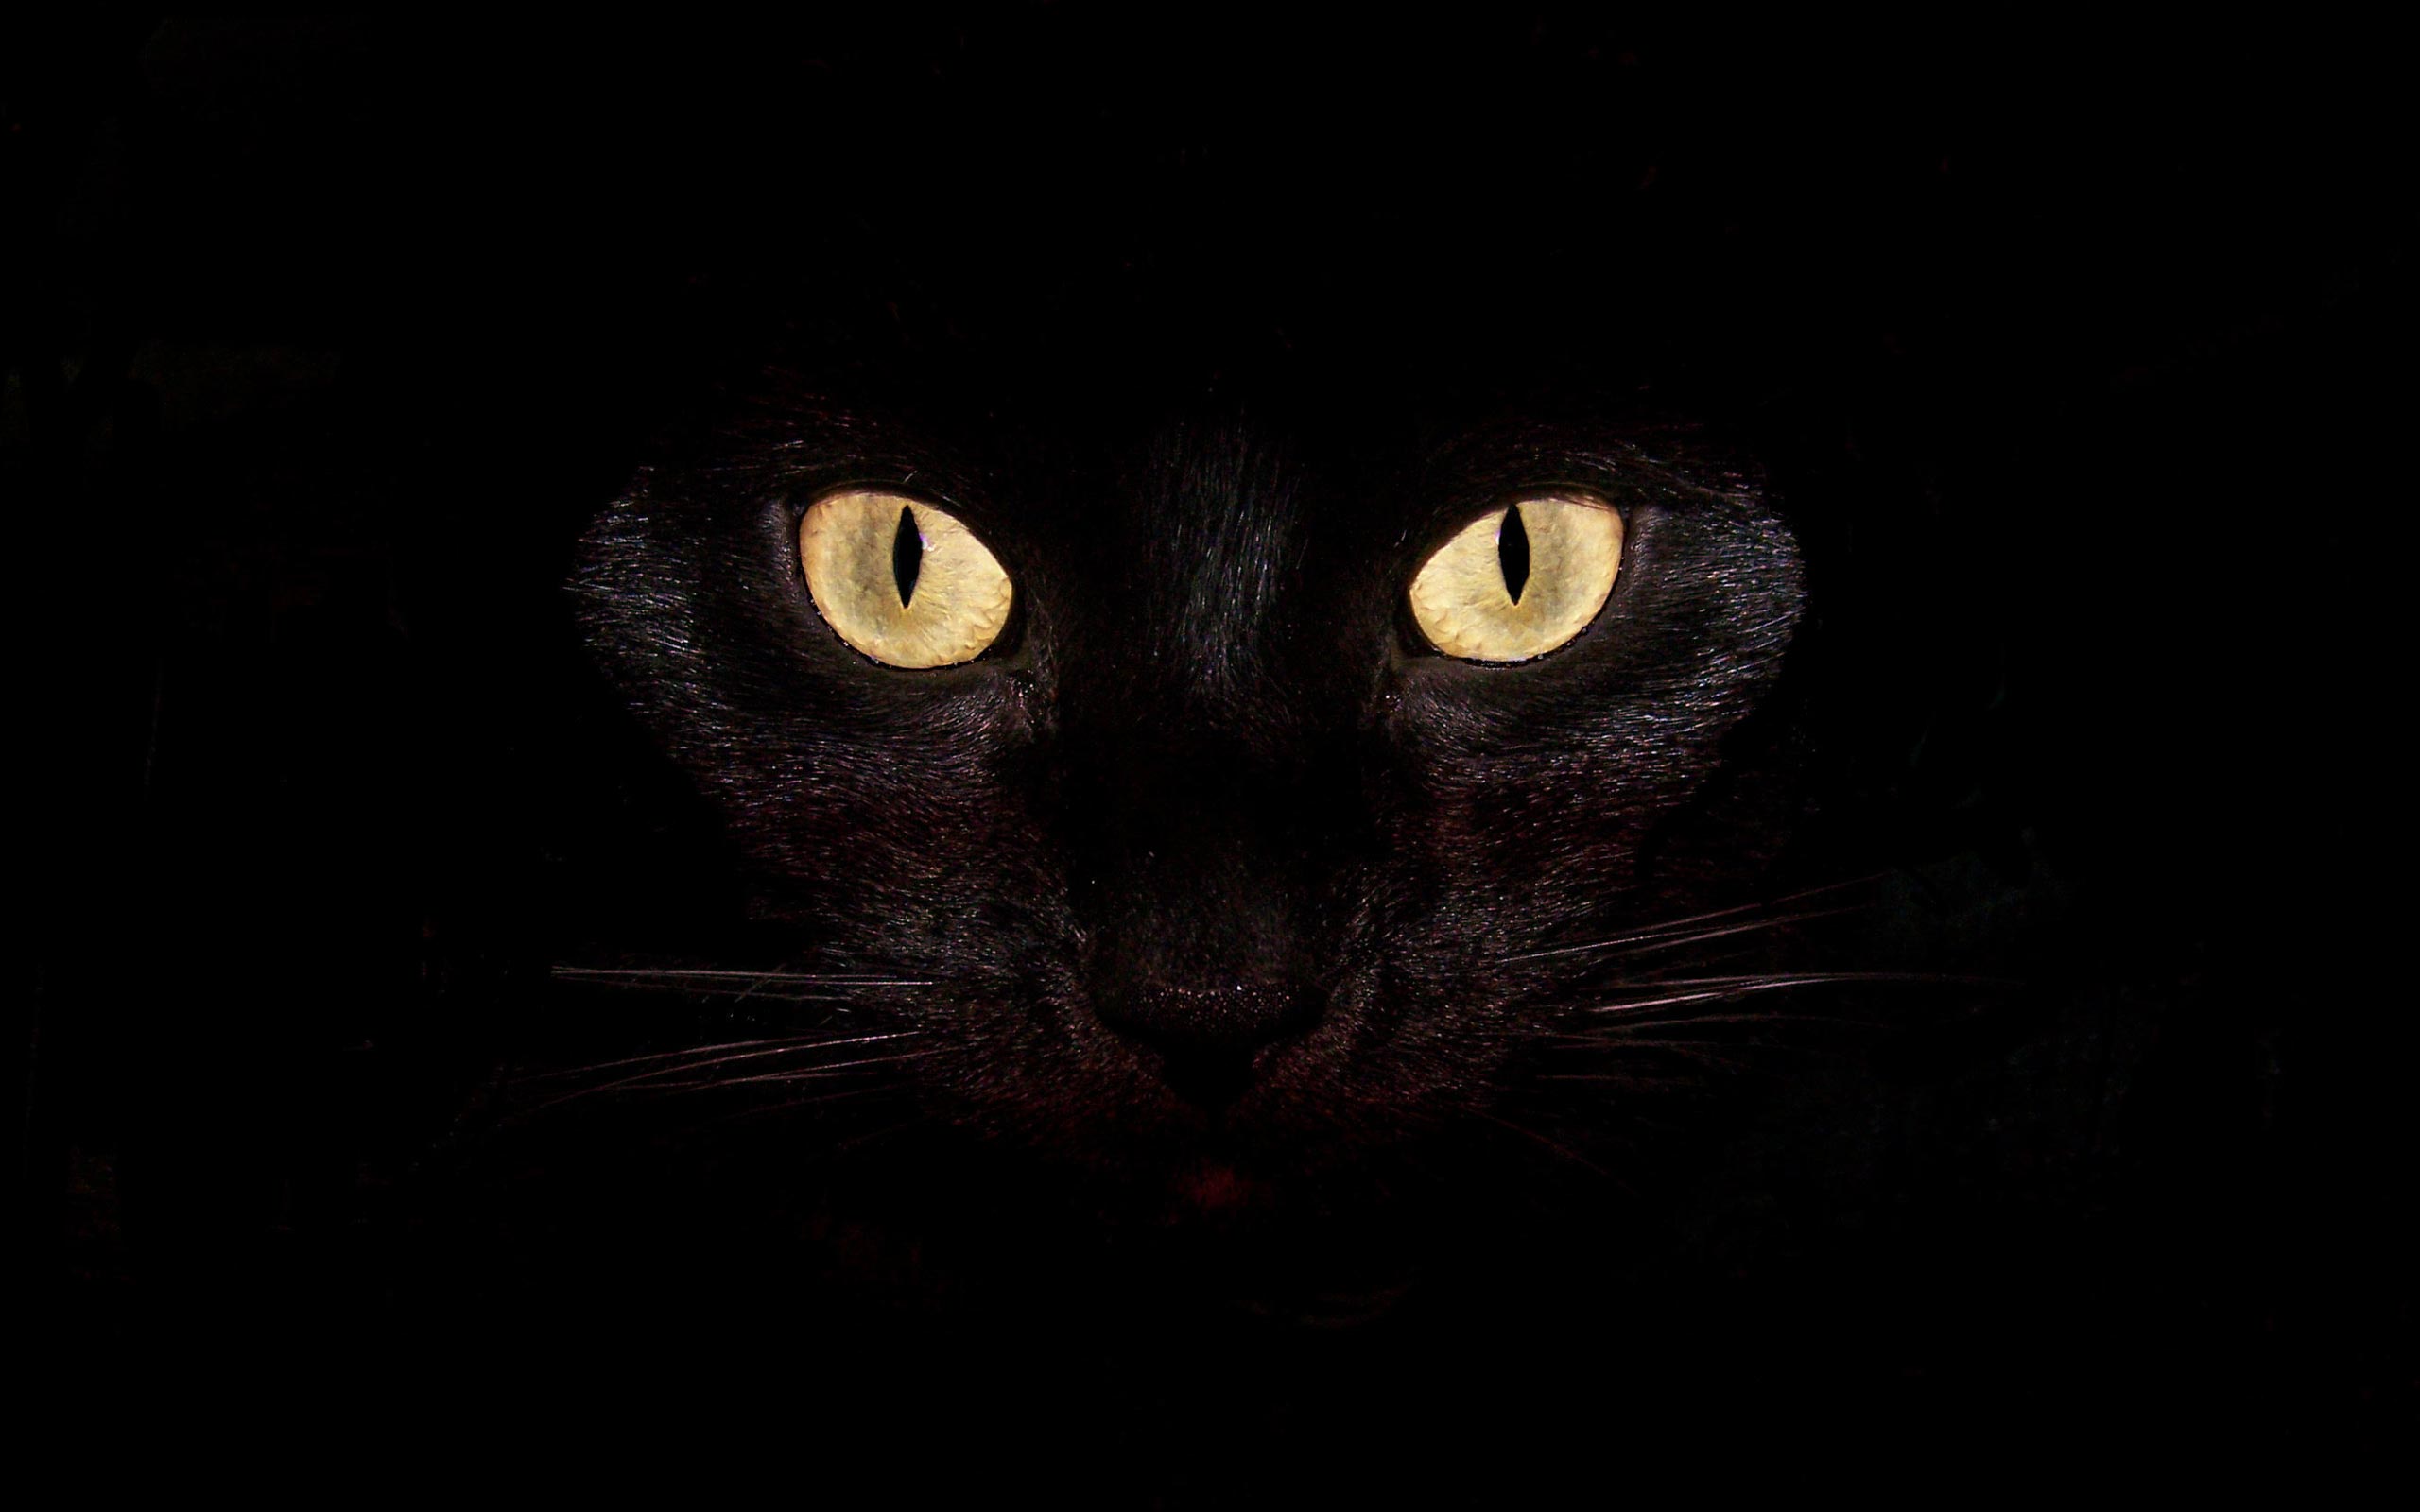  Black cat backgrounds Wallpaper and make this wallpaper for your